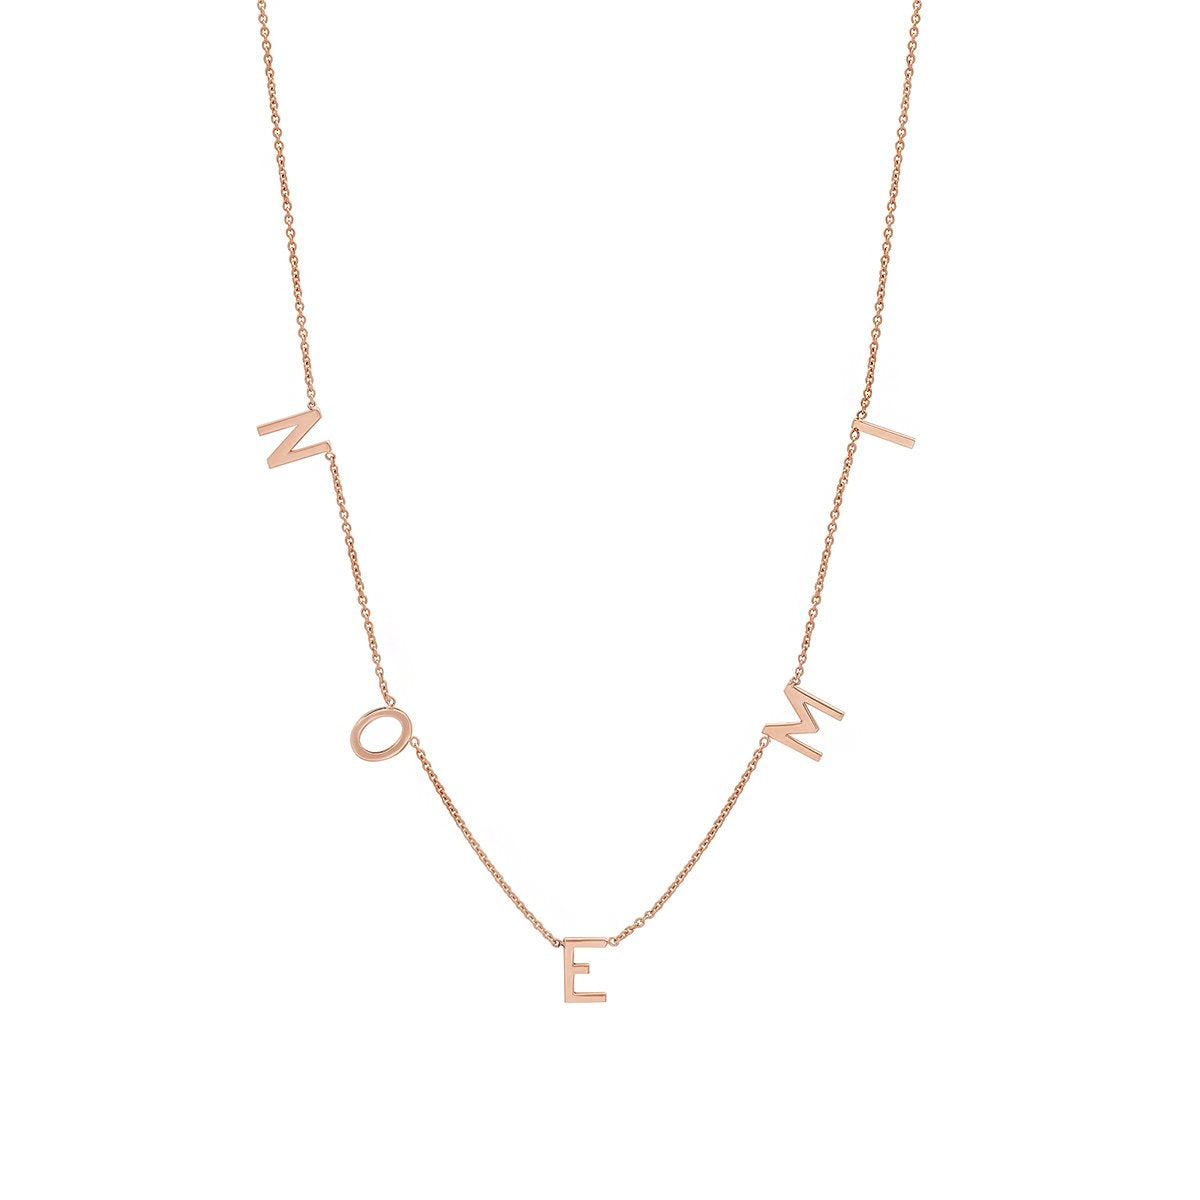 THE ORIGINAL SPACED LETTER NECKLACE - Large®